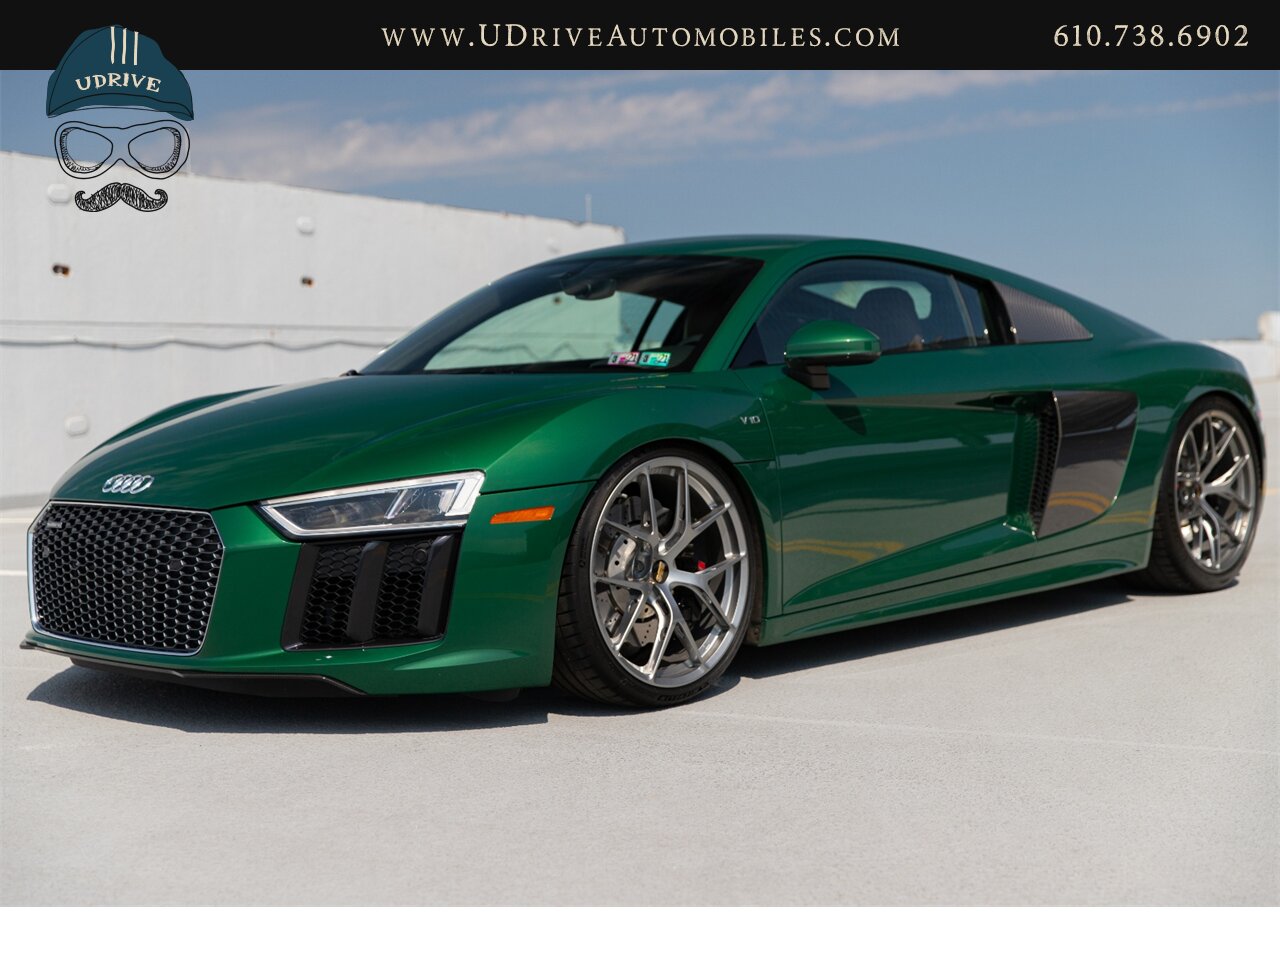 2017 Audi R8 Audi Exclusive Avocado Green Vermont Brown Leather  Diamond Stitching V10 Carbon Fiber - Photo 11 - West Chester, PA 19382